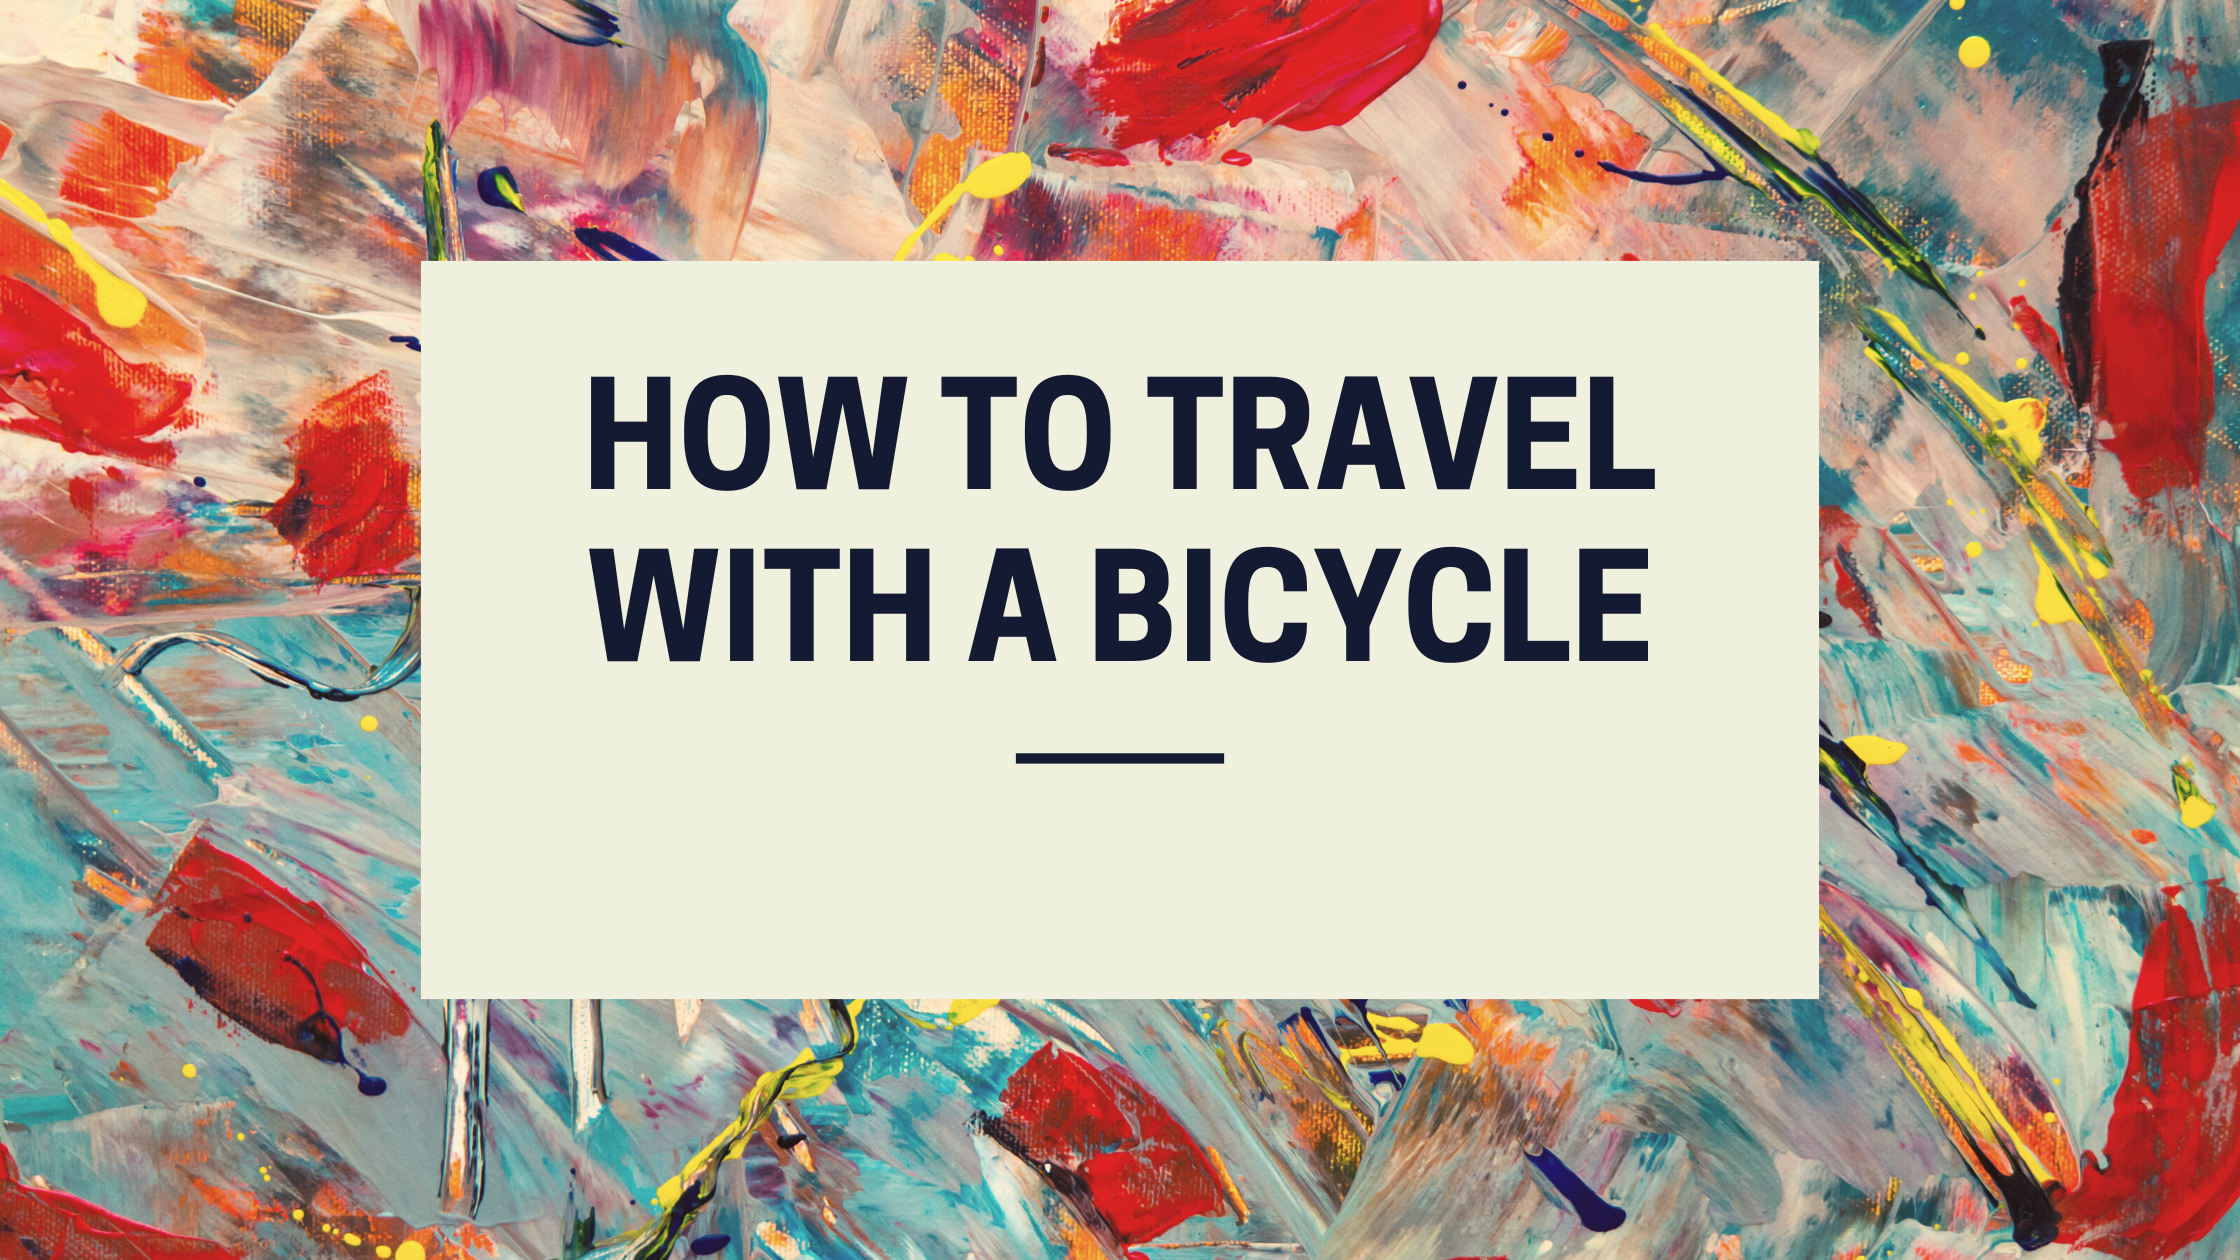 How to Travel With a Bicycle